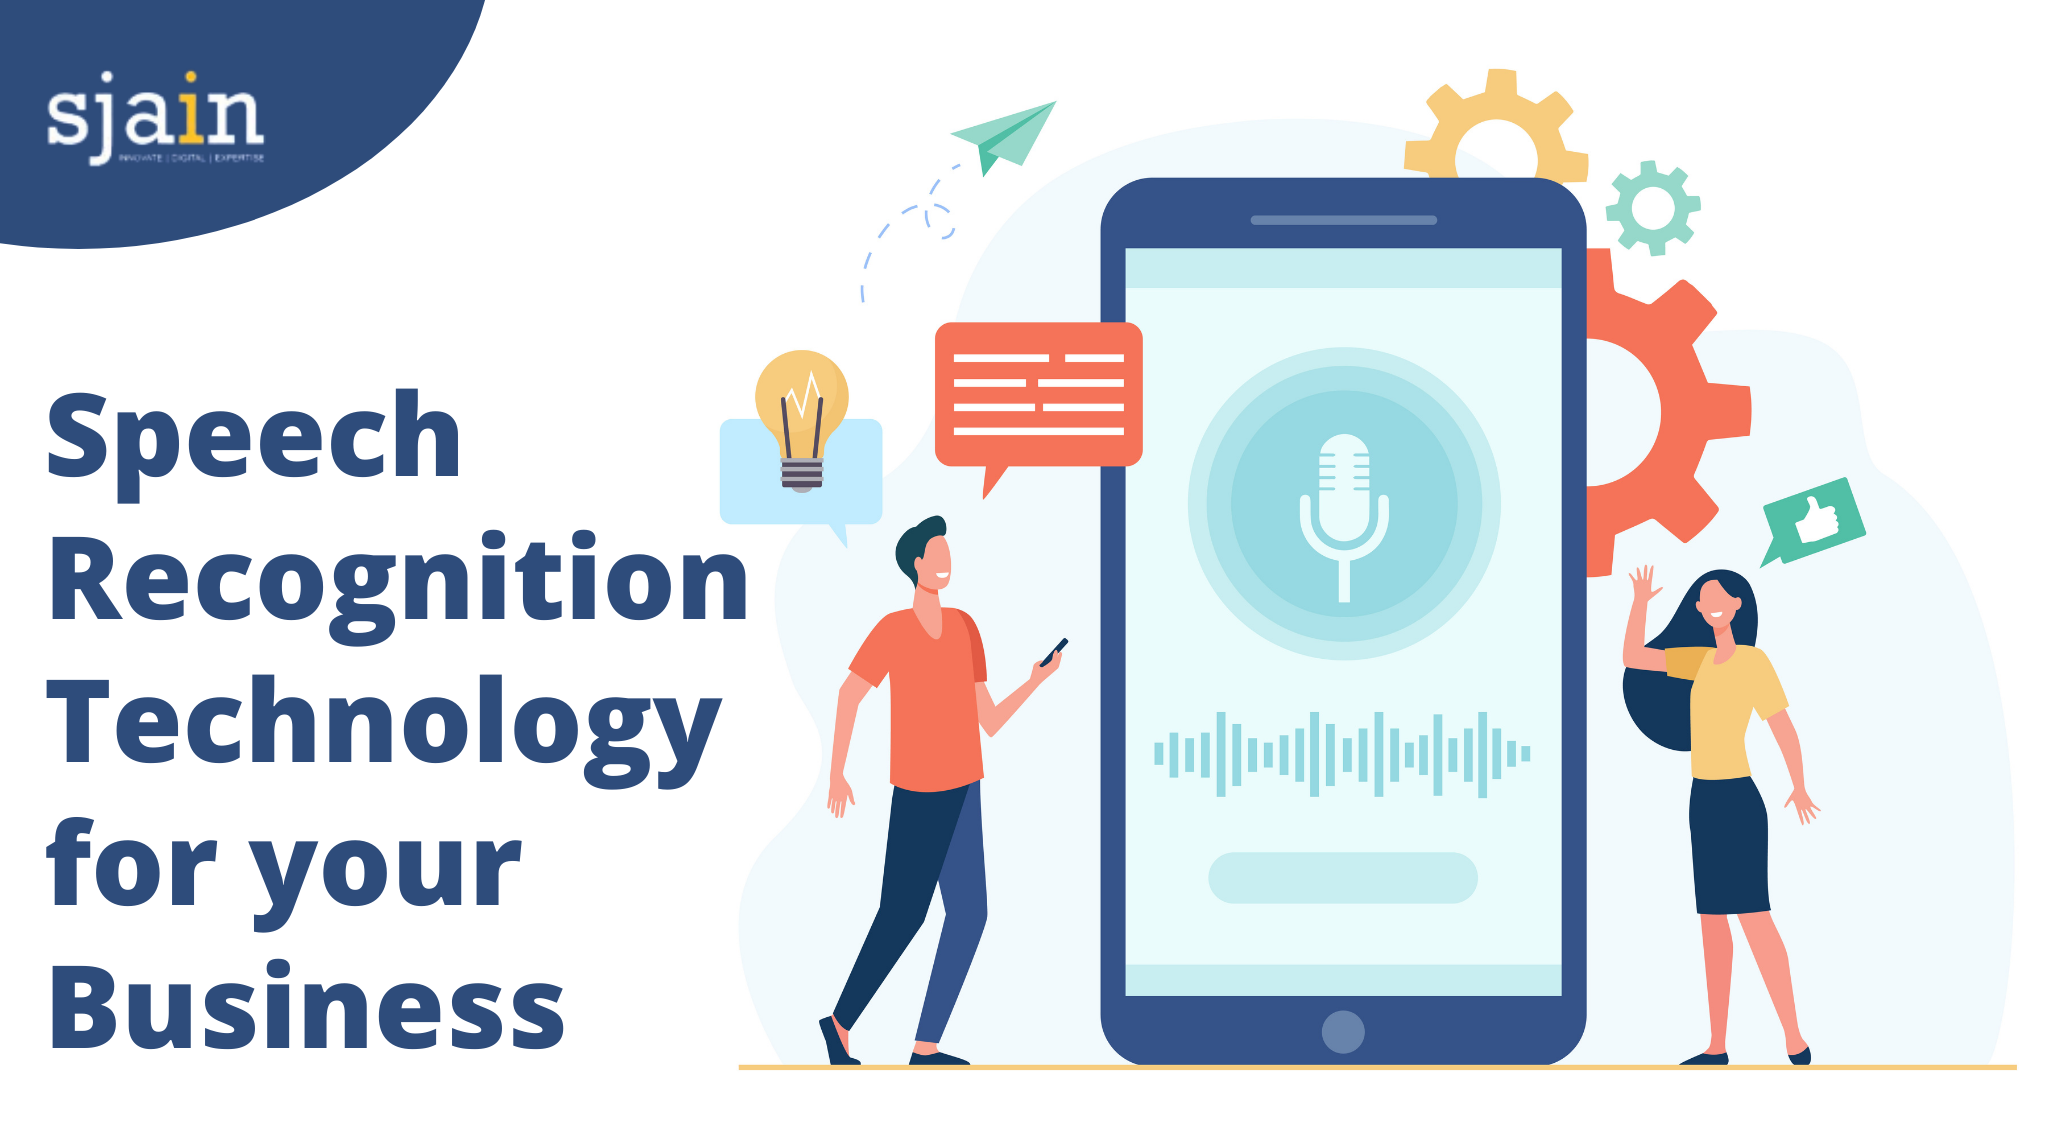 speech recognition technology can create new opportunities for your business - sjain ventures